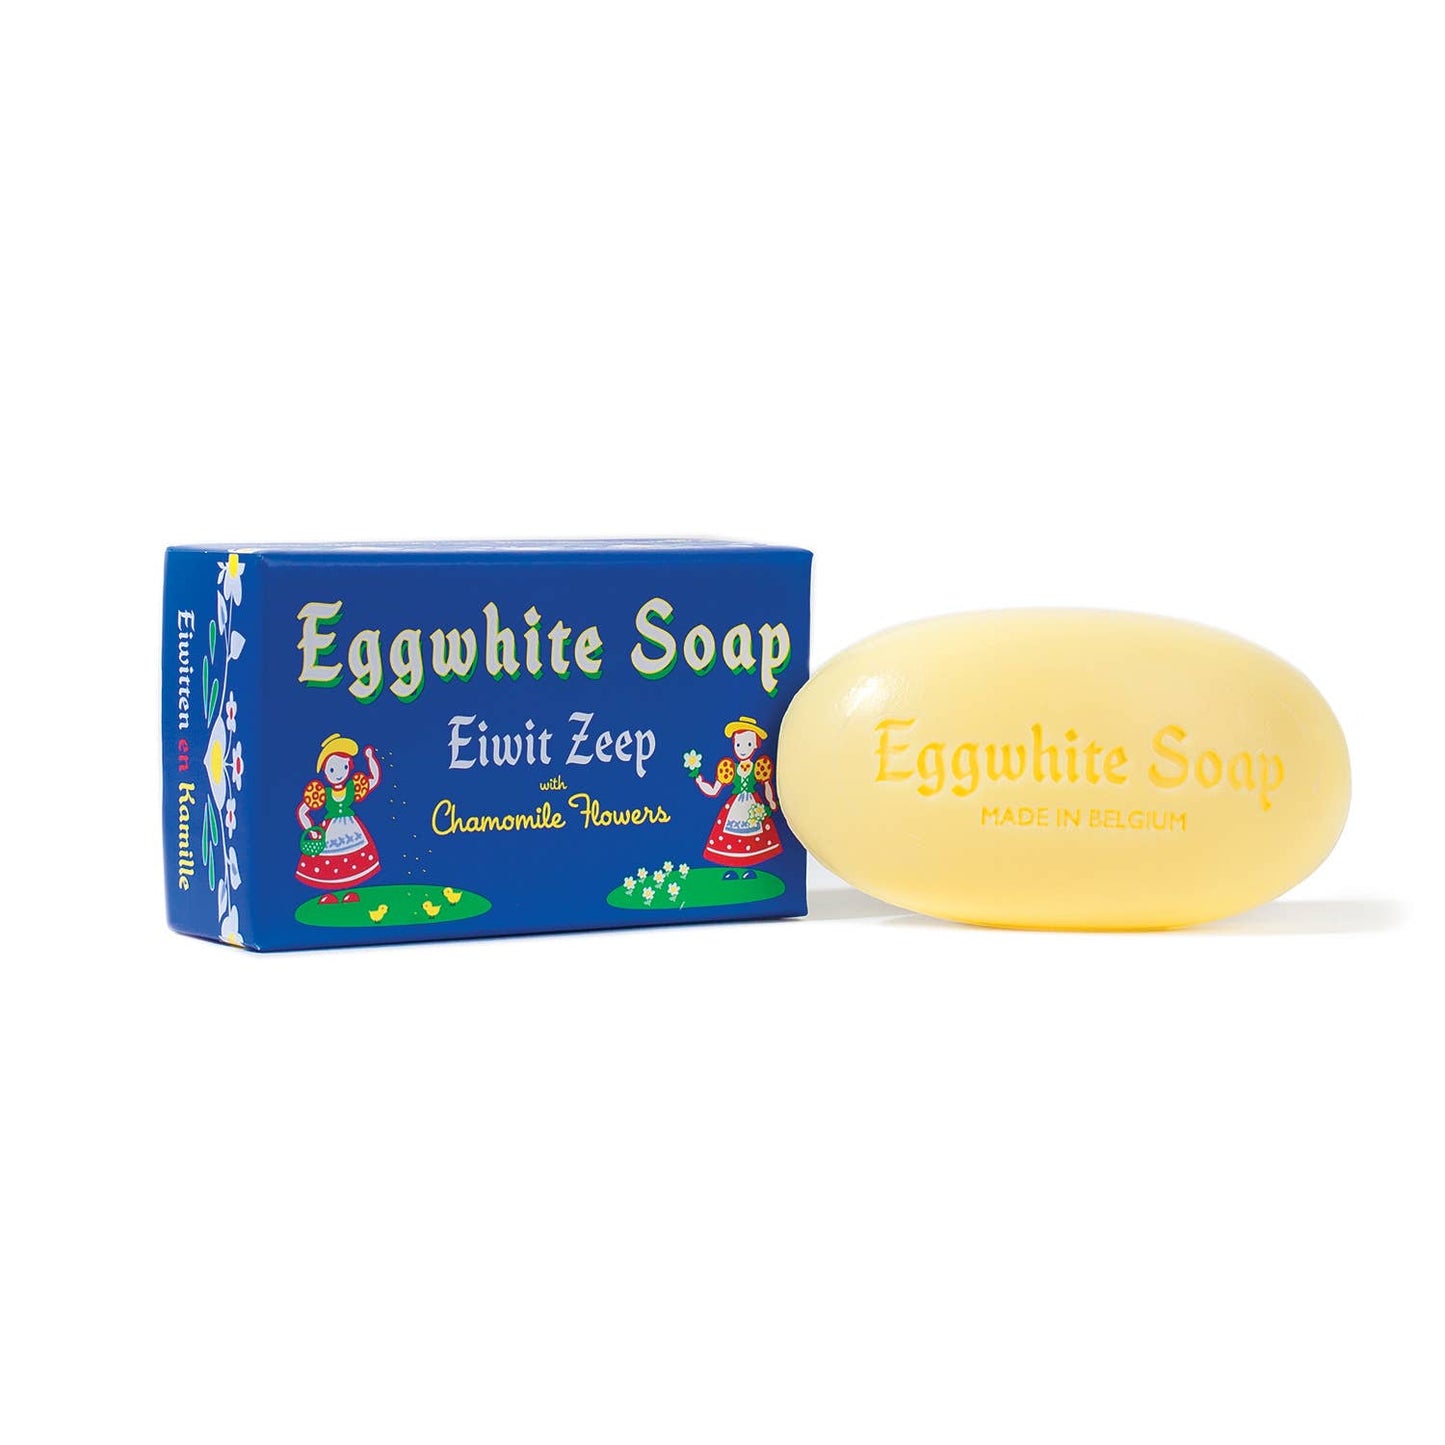 Kalastyle - Eggwhite and Chamomile Flower Facial Soap